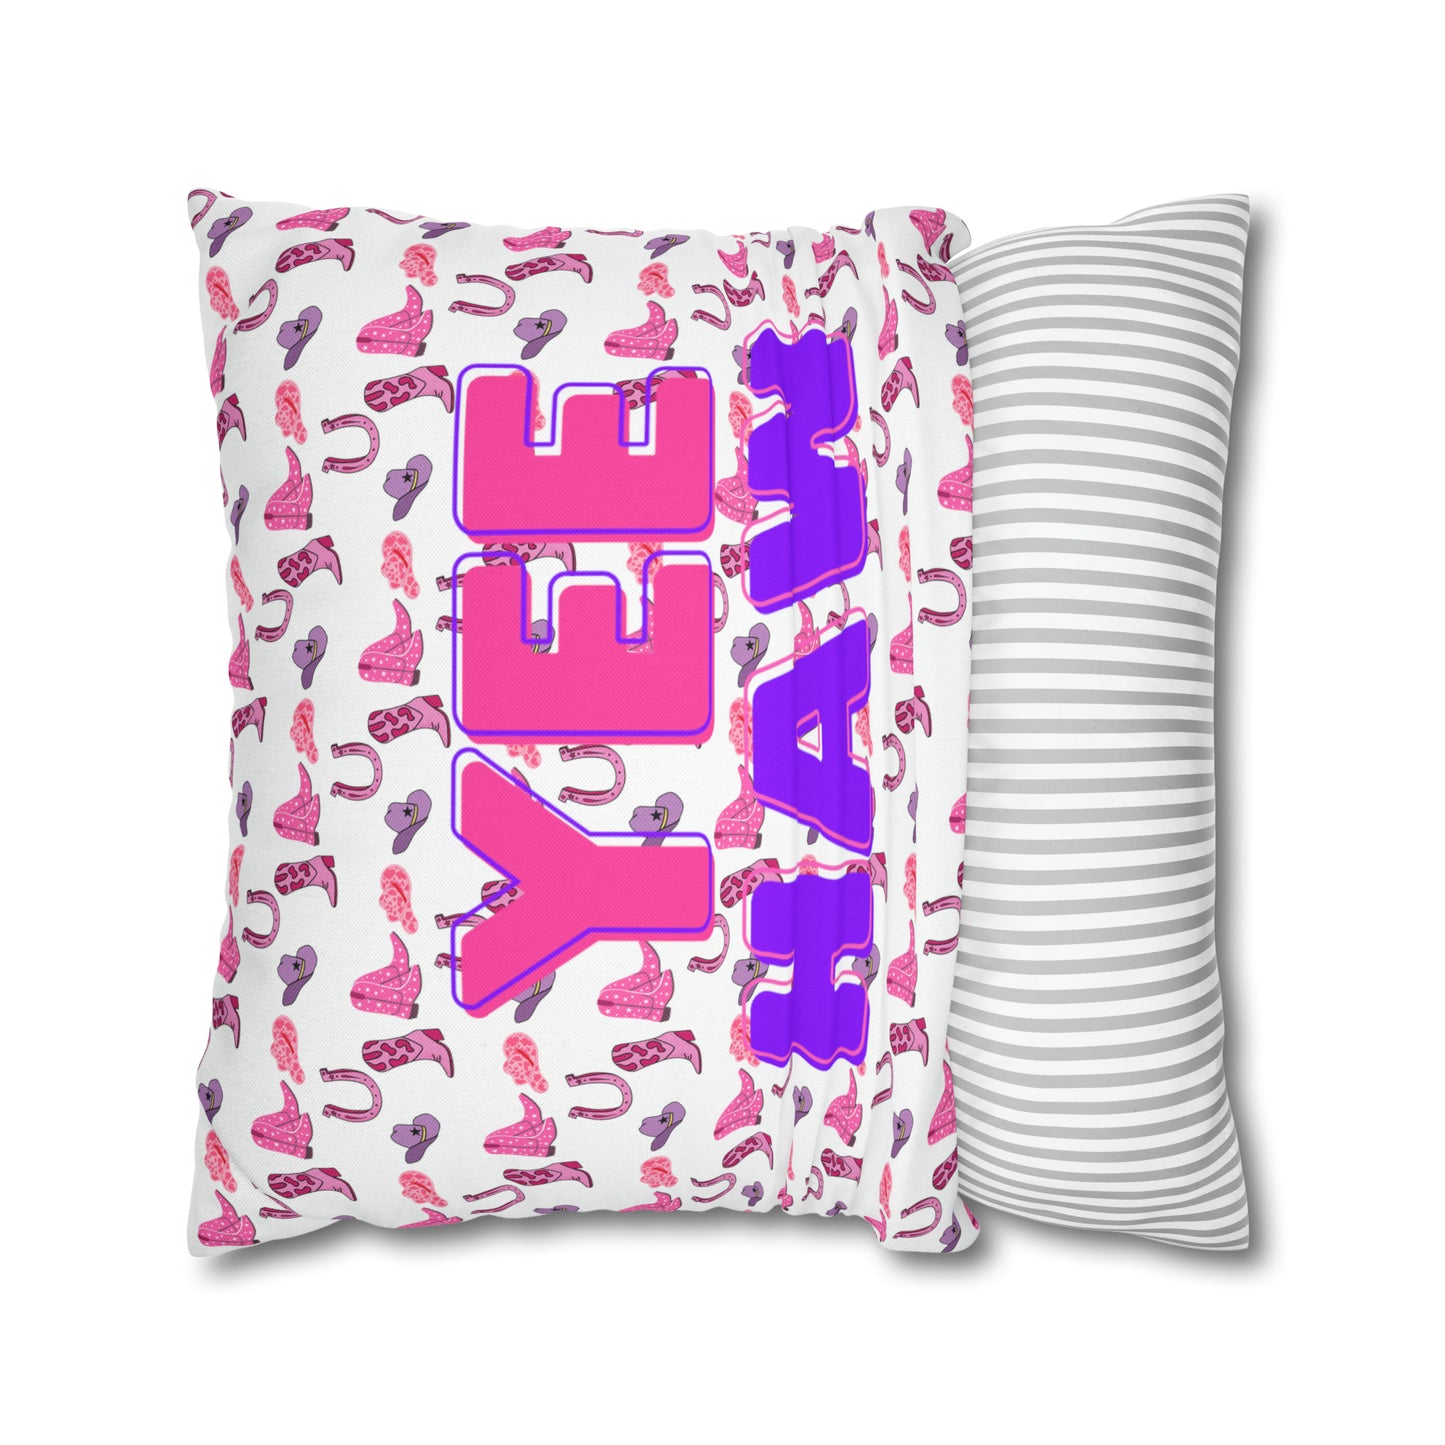 Yee Haw Pink Purple Cowgirl Hat & Boots Patterned Square Pillow Cover Multiple Sizes